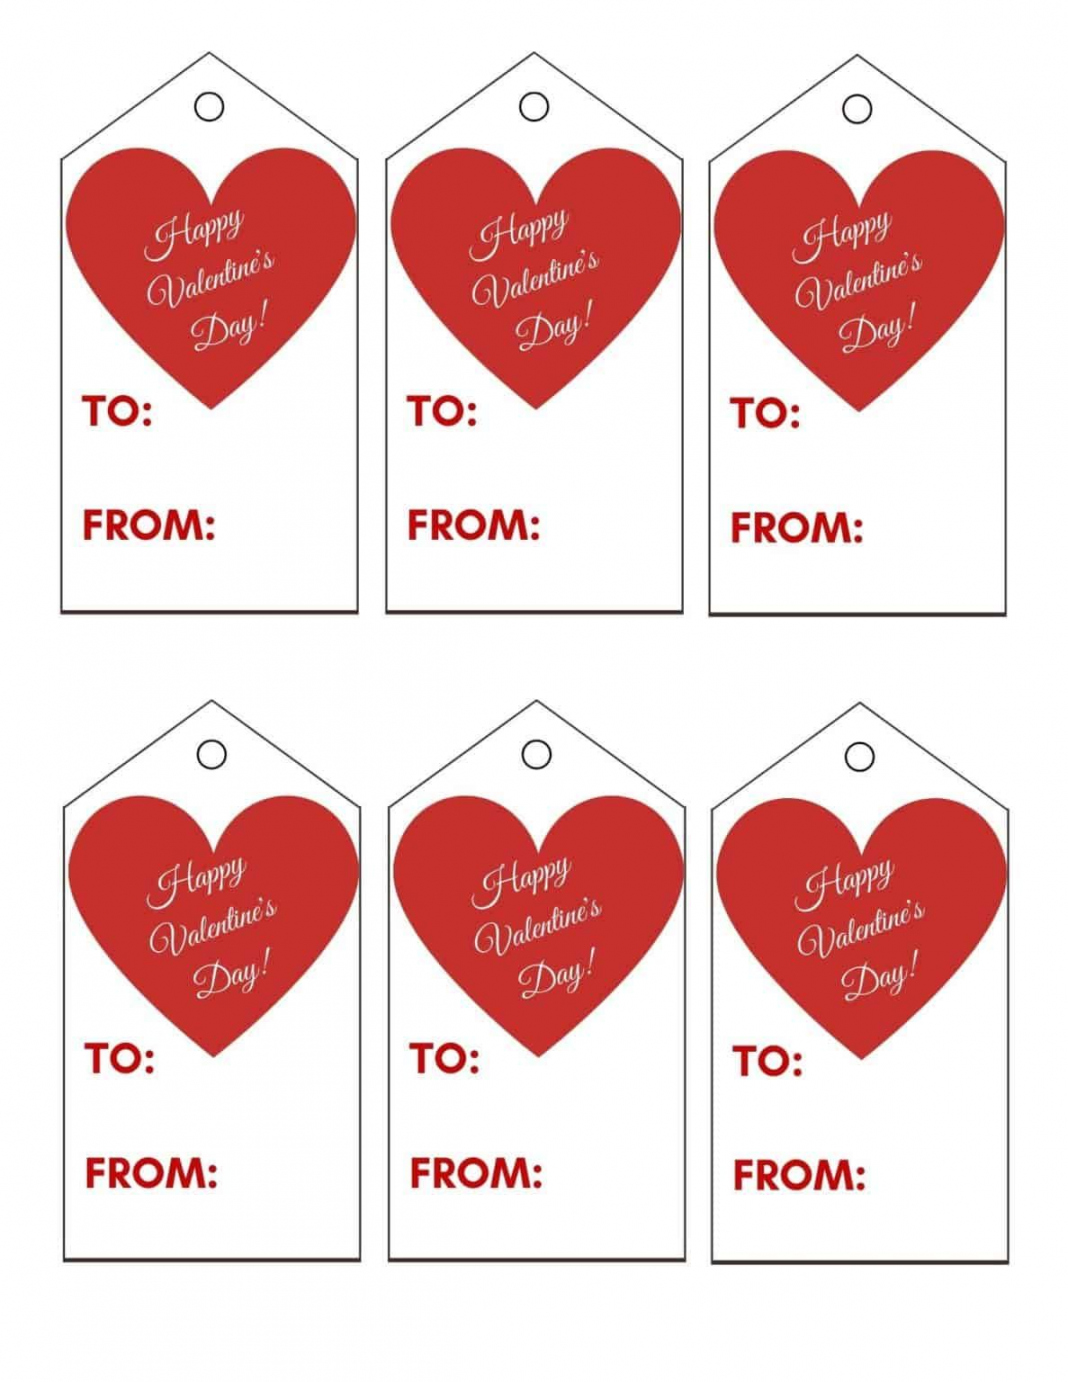 Pin on Paper Crafting - FREE Printables - Valentine Tags Printable Free